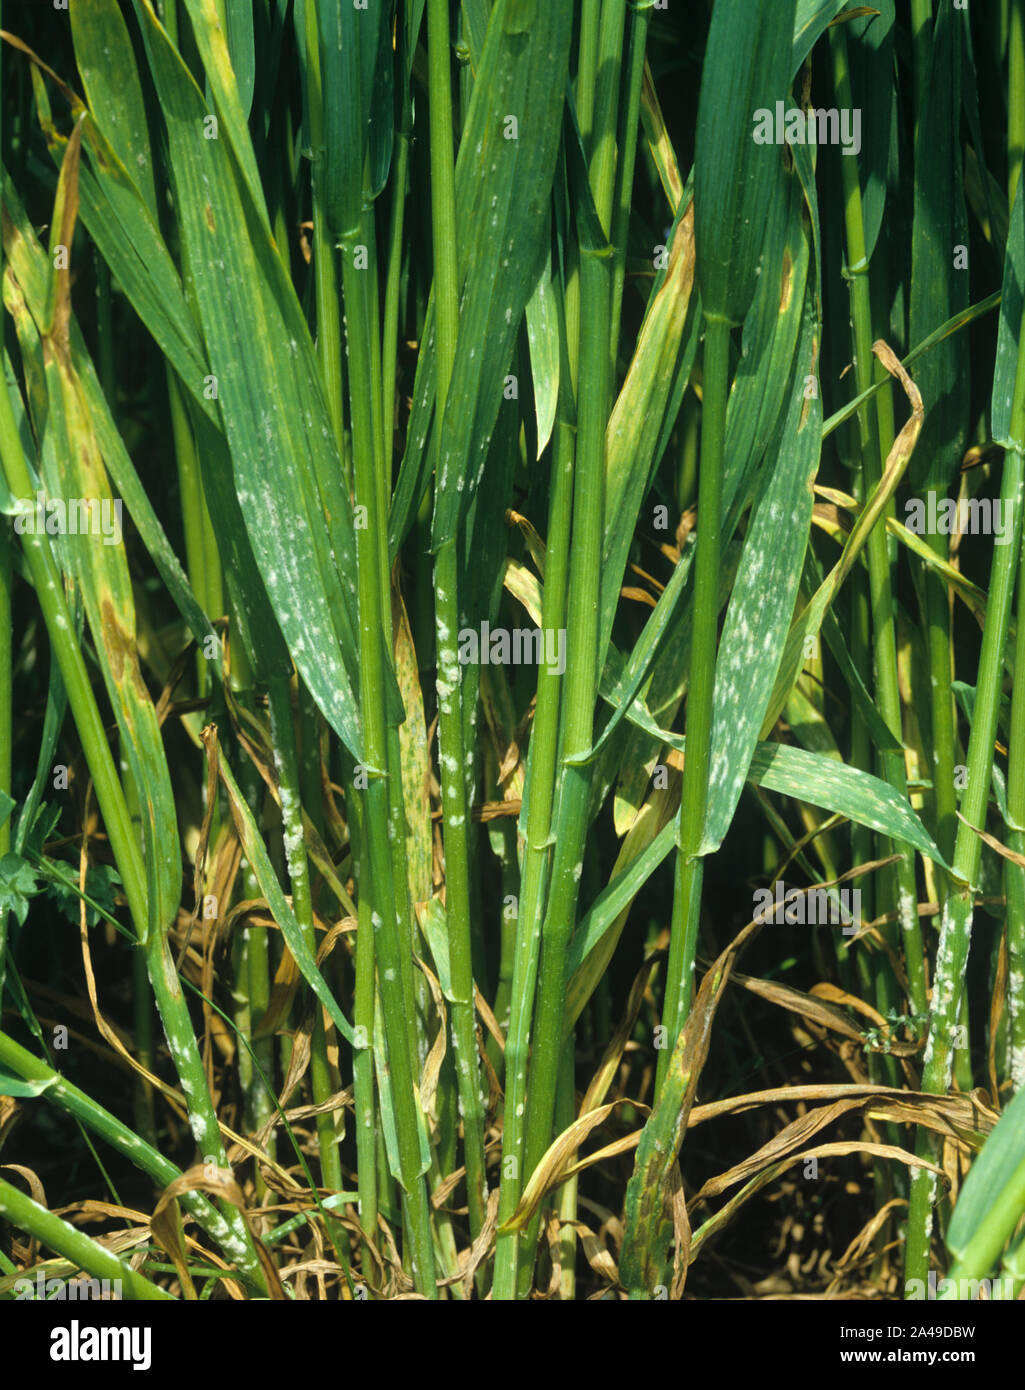 Powdery mildew (Erysiphe graminis f.sp. tritici) infection on wheat crop coming into ear, white pustules on the stem and lower leaves Stock Photo